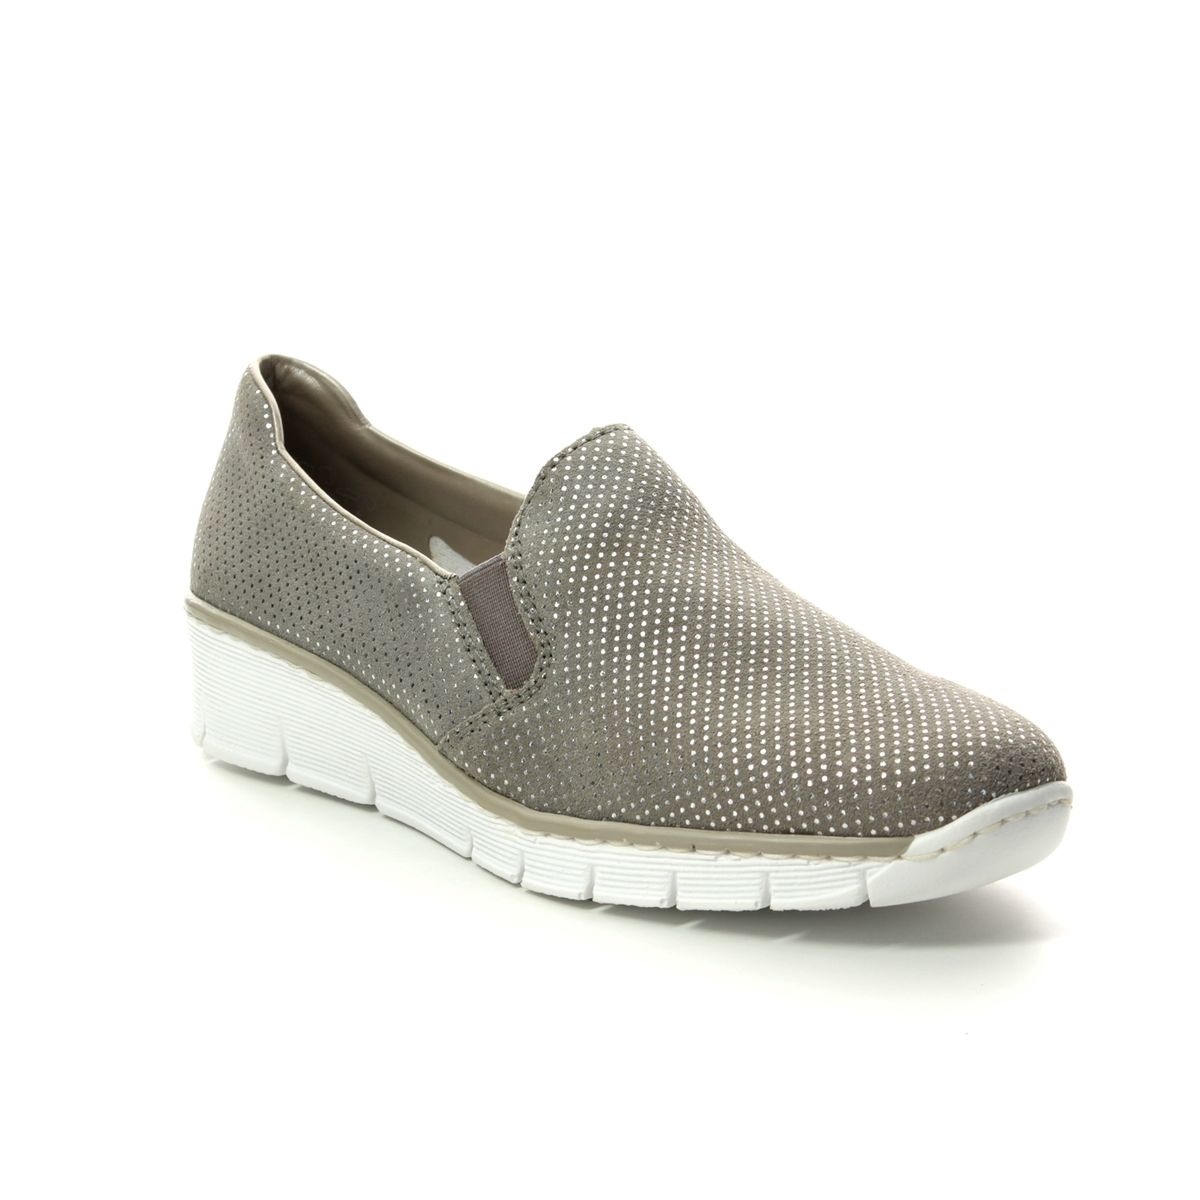 Rieker Bocciago Light Taupe Womens Comfort Slip On Shoes 53766-41 In Size 37 In Plain Light Taupe